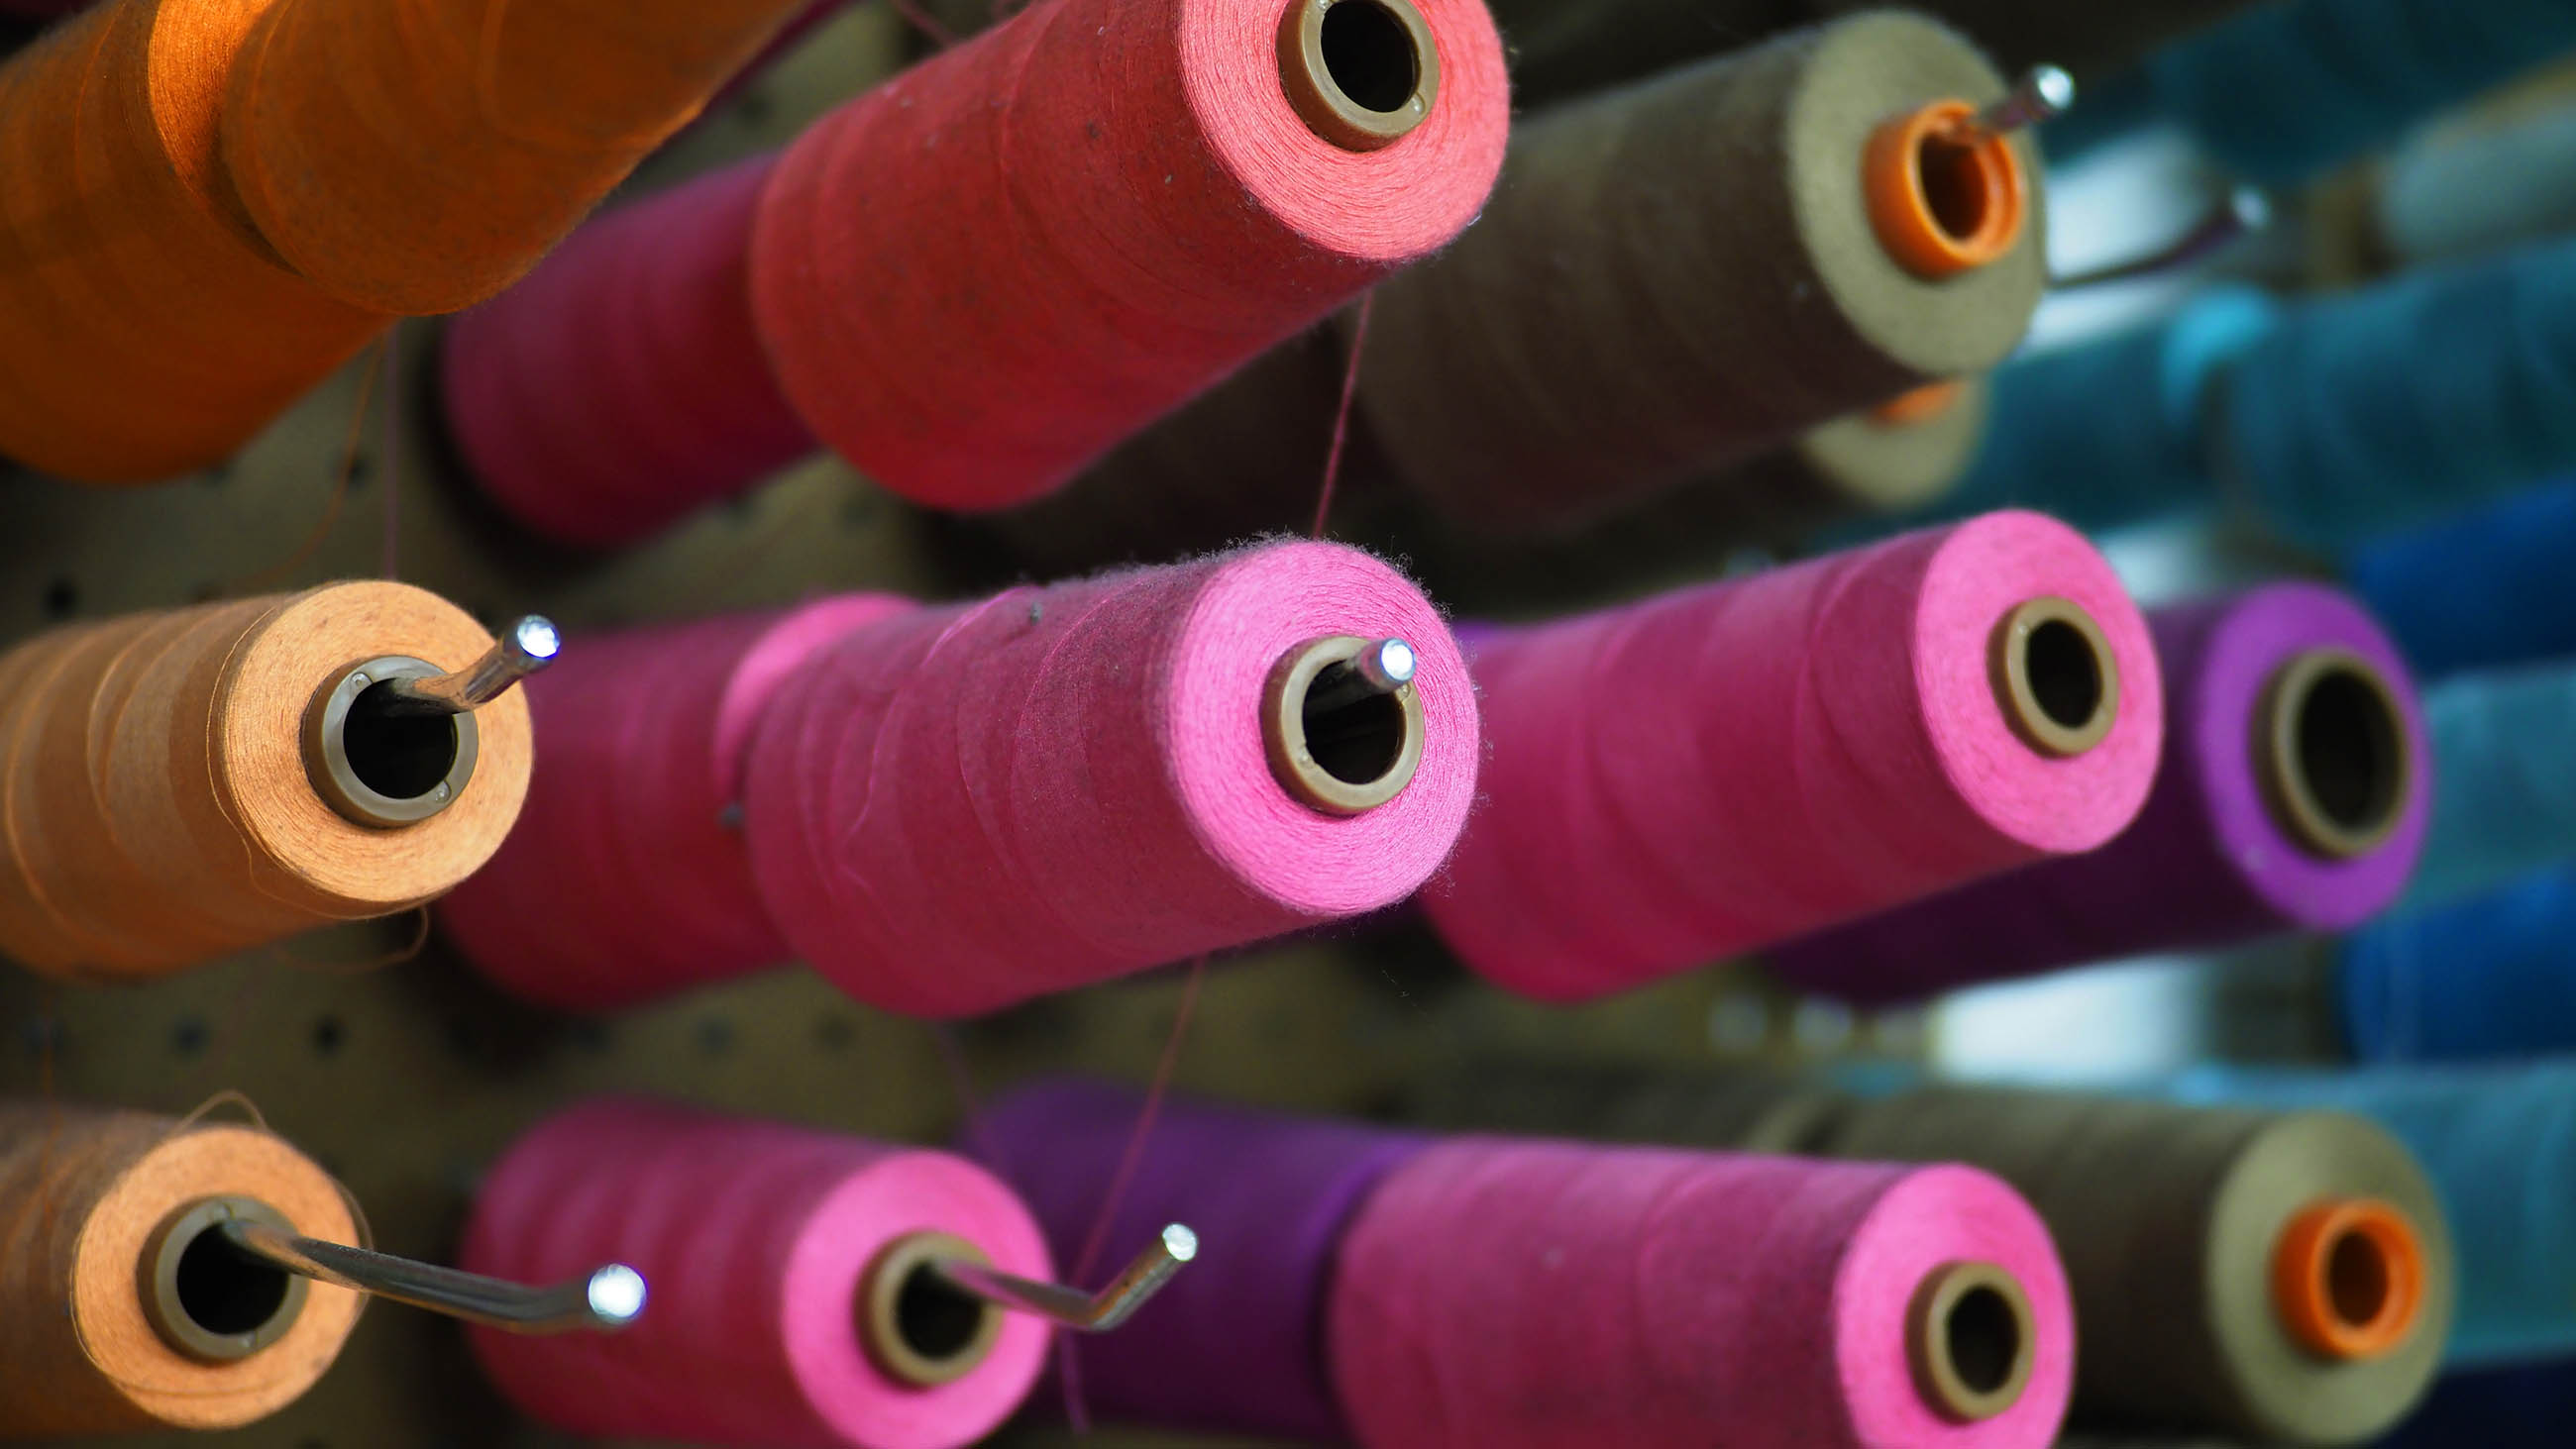 Thread stock at Opportunity Threads in Morgantown, North Carolina. The growing co-op is nimble enough to sustain multiple orders of custom cut-and-sew products for clients across the country. Image by Larry C. Price. United States, 2016.